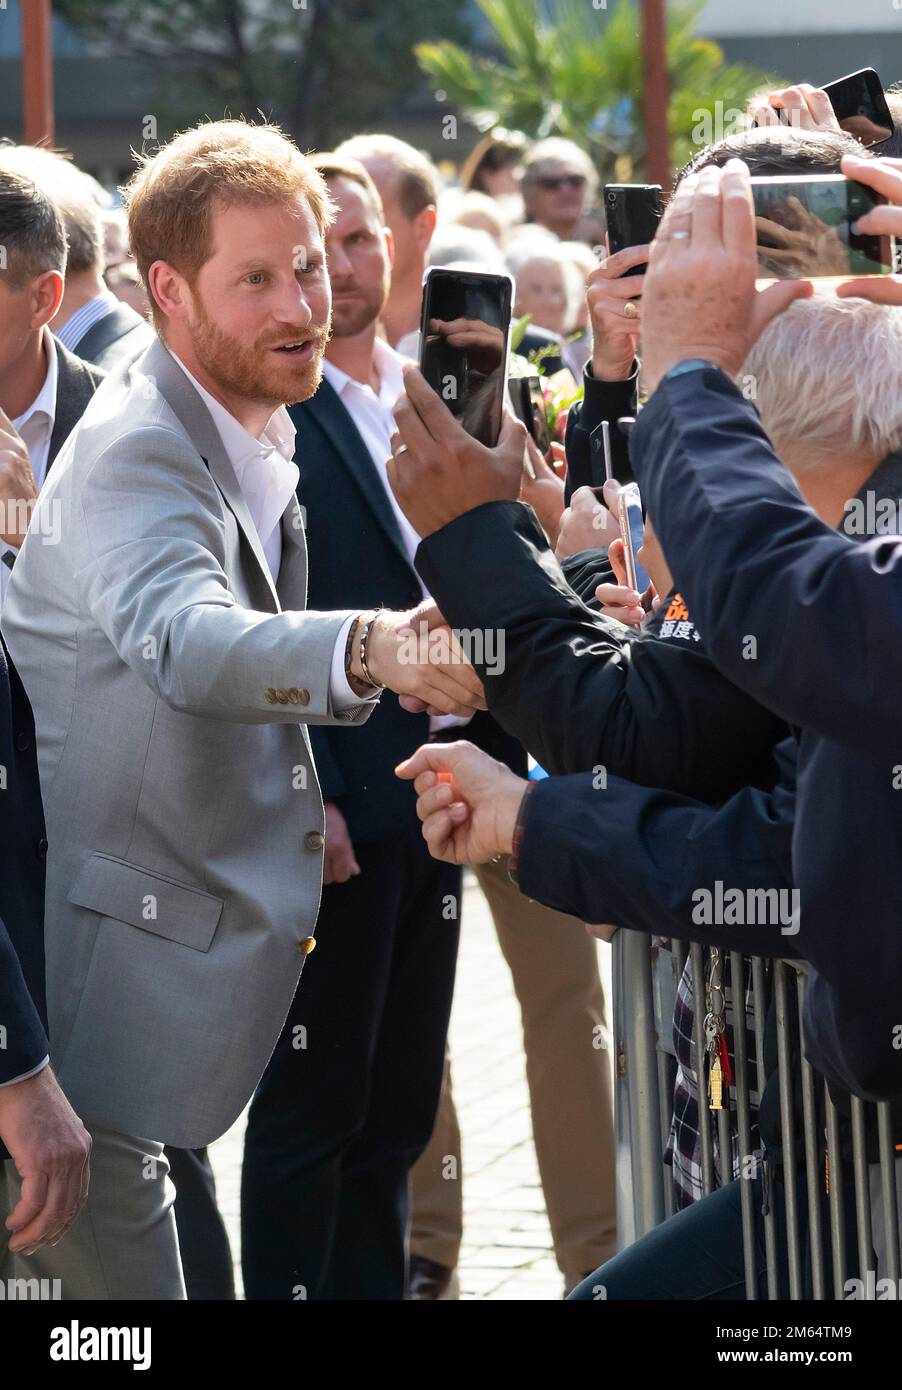 Brighton Uk 3rd October 2018 The Duke And Duchess Of Sussex Prince Harry And Meghan Markle